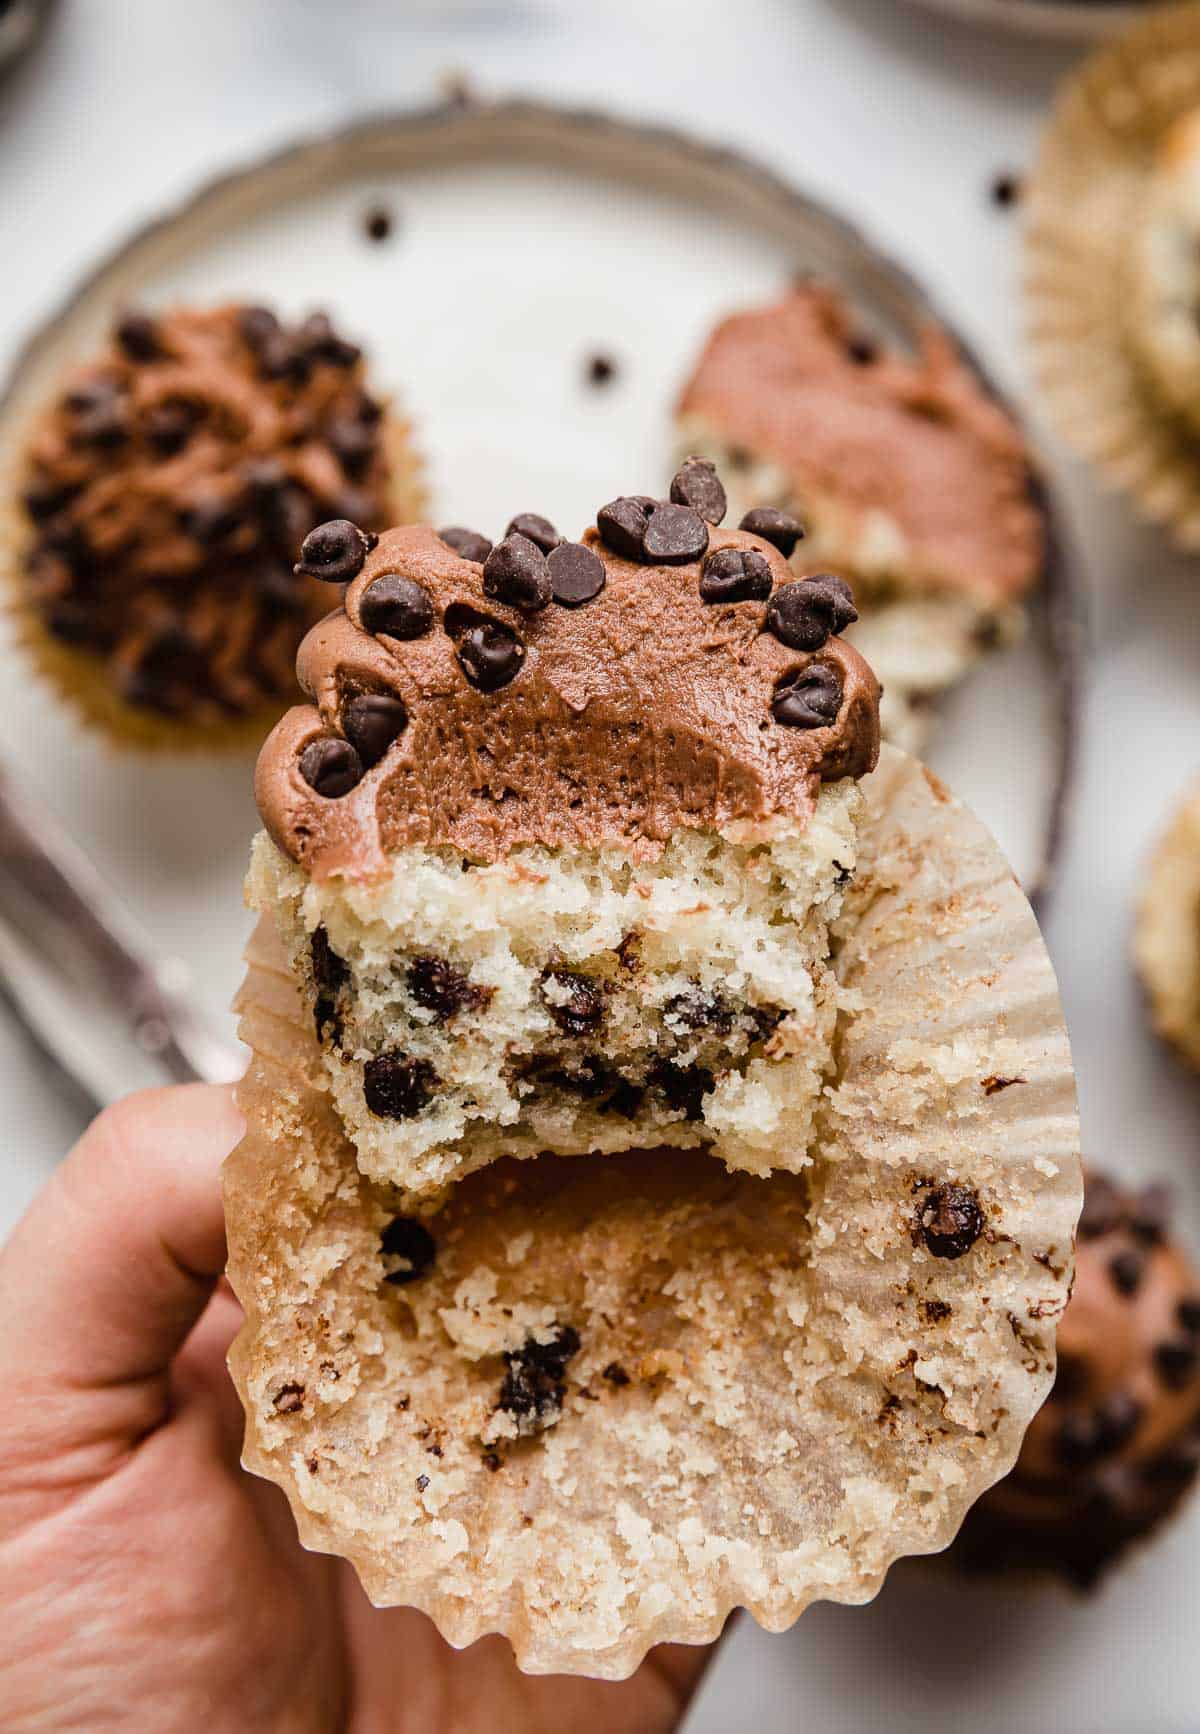 A hand holding a chocolate chip cupcake with chocolate frosting, and a bite taken out of the cupcake!